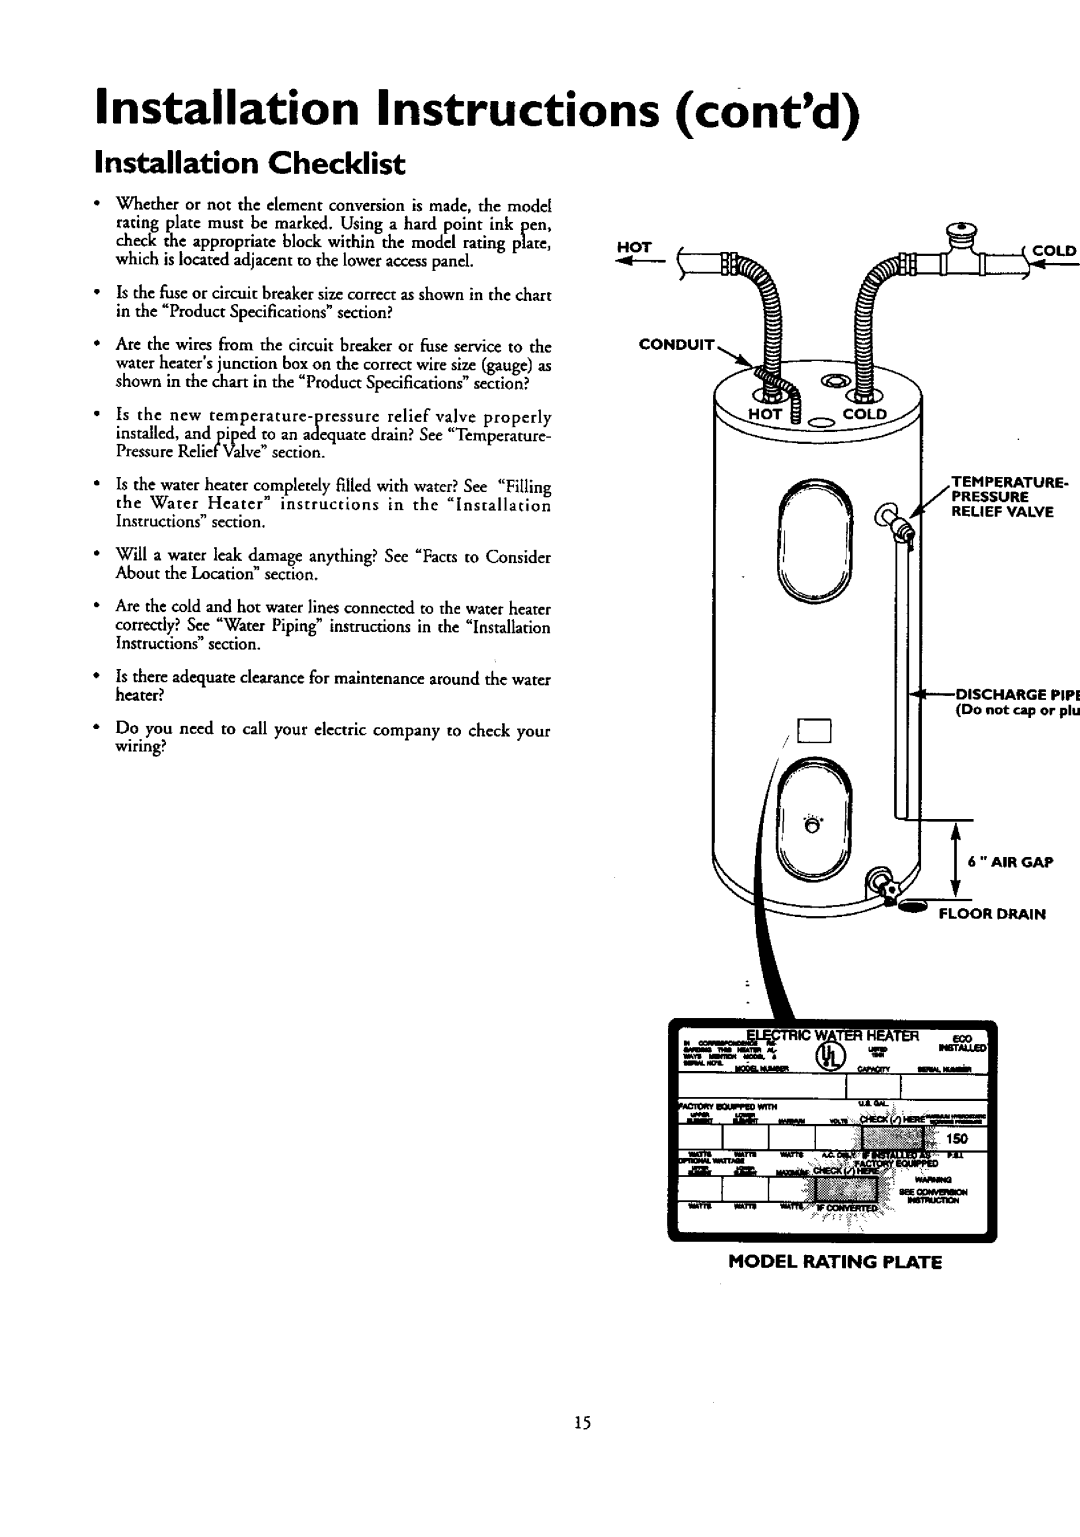 Kenmore 153.320890 HT 82 GAL owner manual Installation Instructions contd, Installation Checklist, Model Rating Plate 